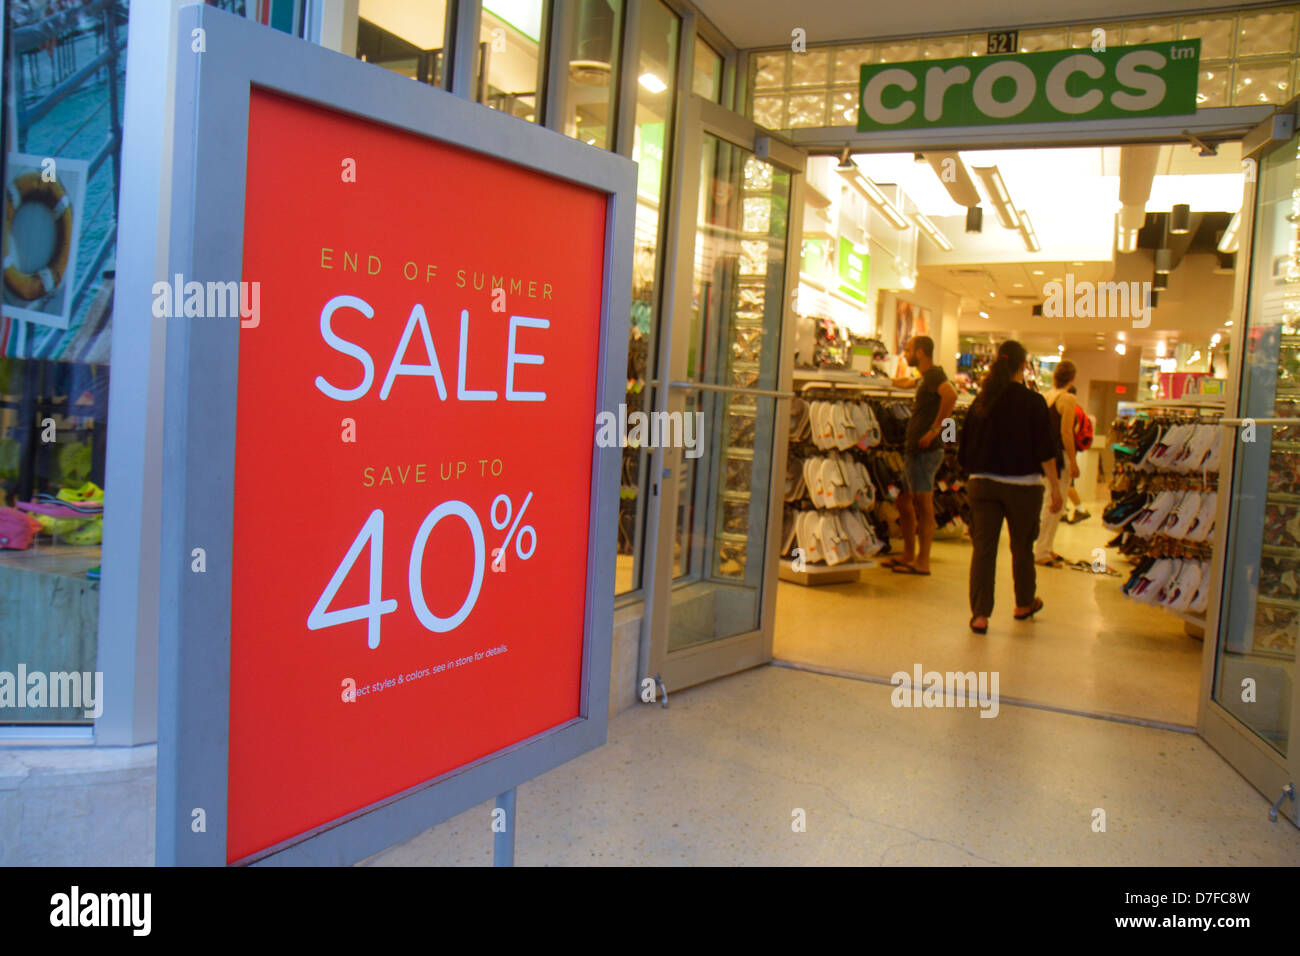 Miami Beach Florida,Lincoln Road mall,shoe store,front,entrance,sign,end of  summer sale,40% discount off,discounted,sale,Crocs,FL120720037 Stock Photo  - Alamy